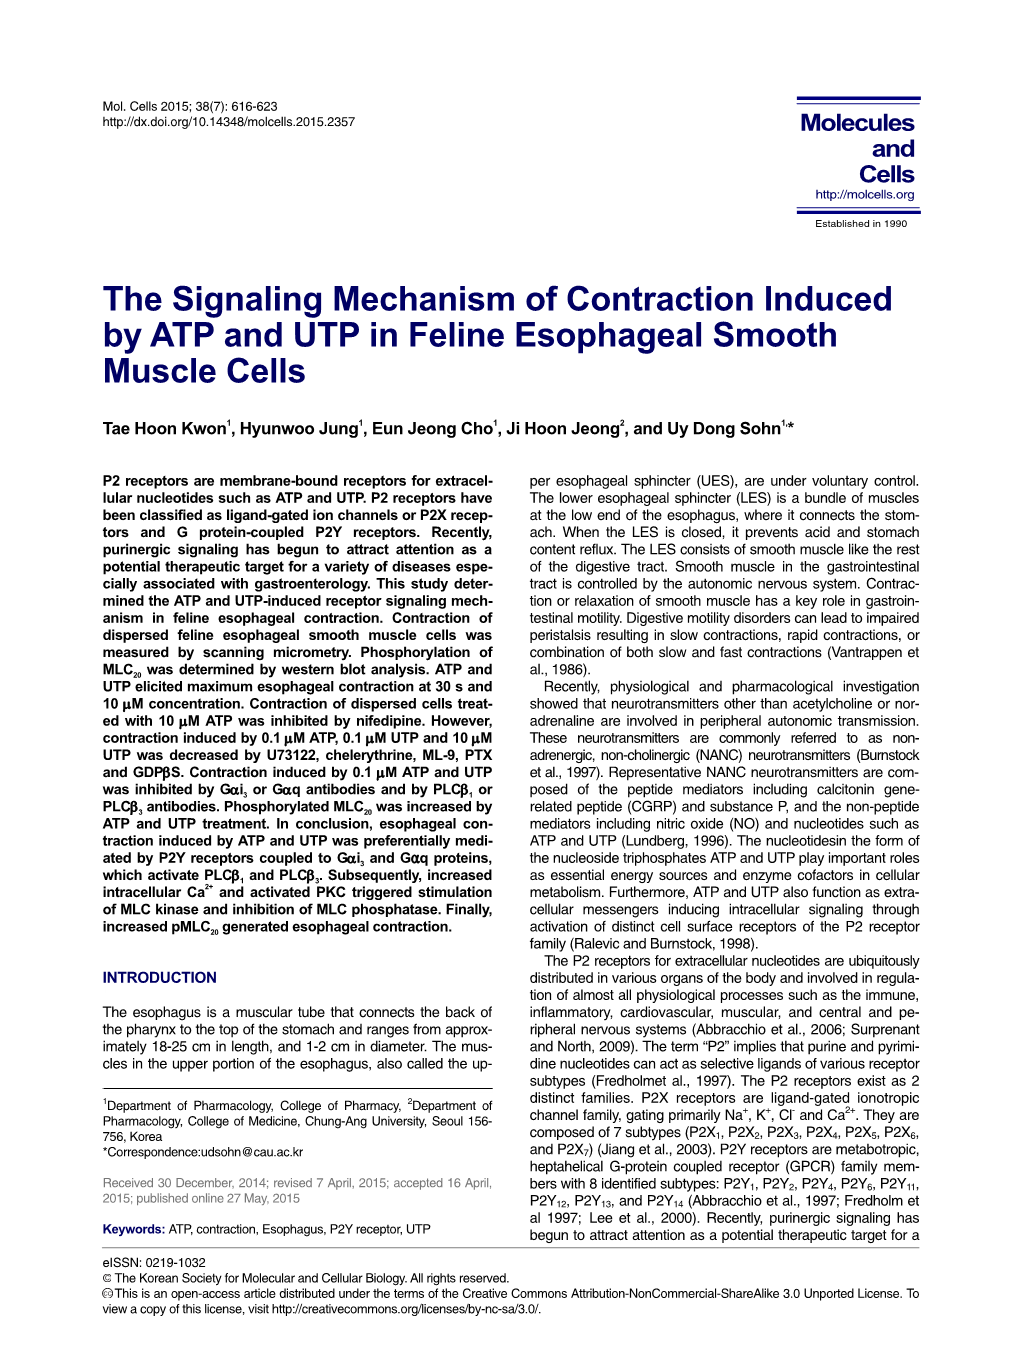 The Signaling Mechanism of Contraction Induced by ATP and UTP in Feline Esophageal Smooth Muscle Cells